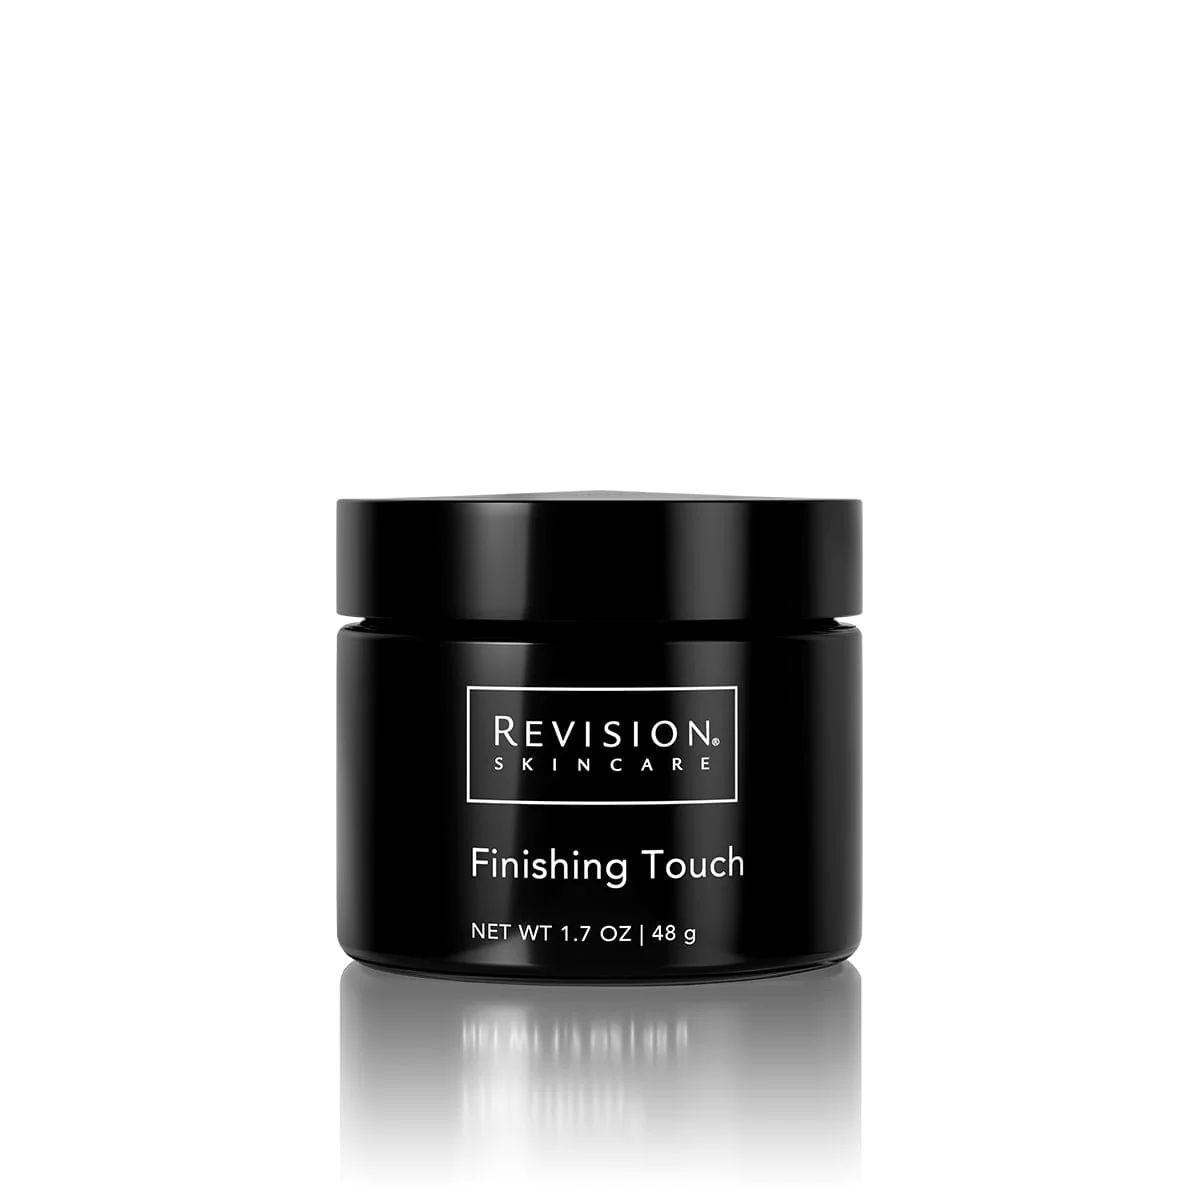 Finishing Touch 1.7 oz | Revision skincare